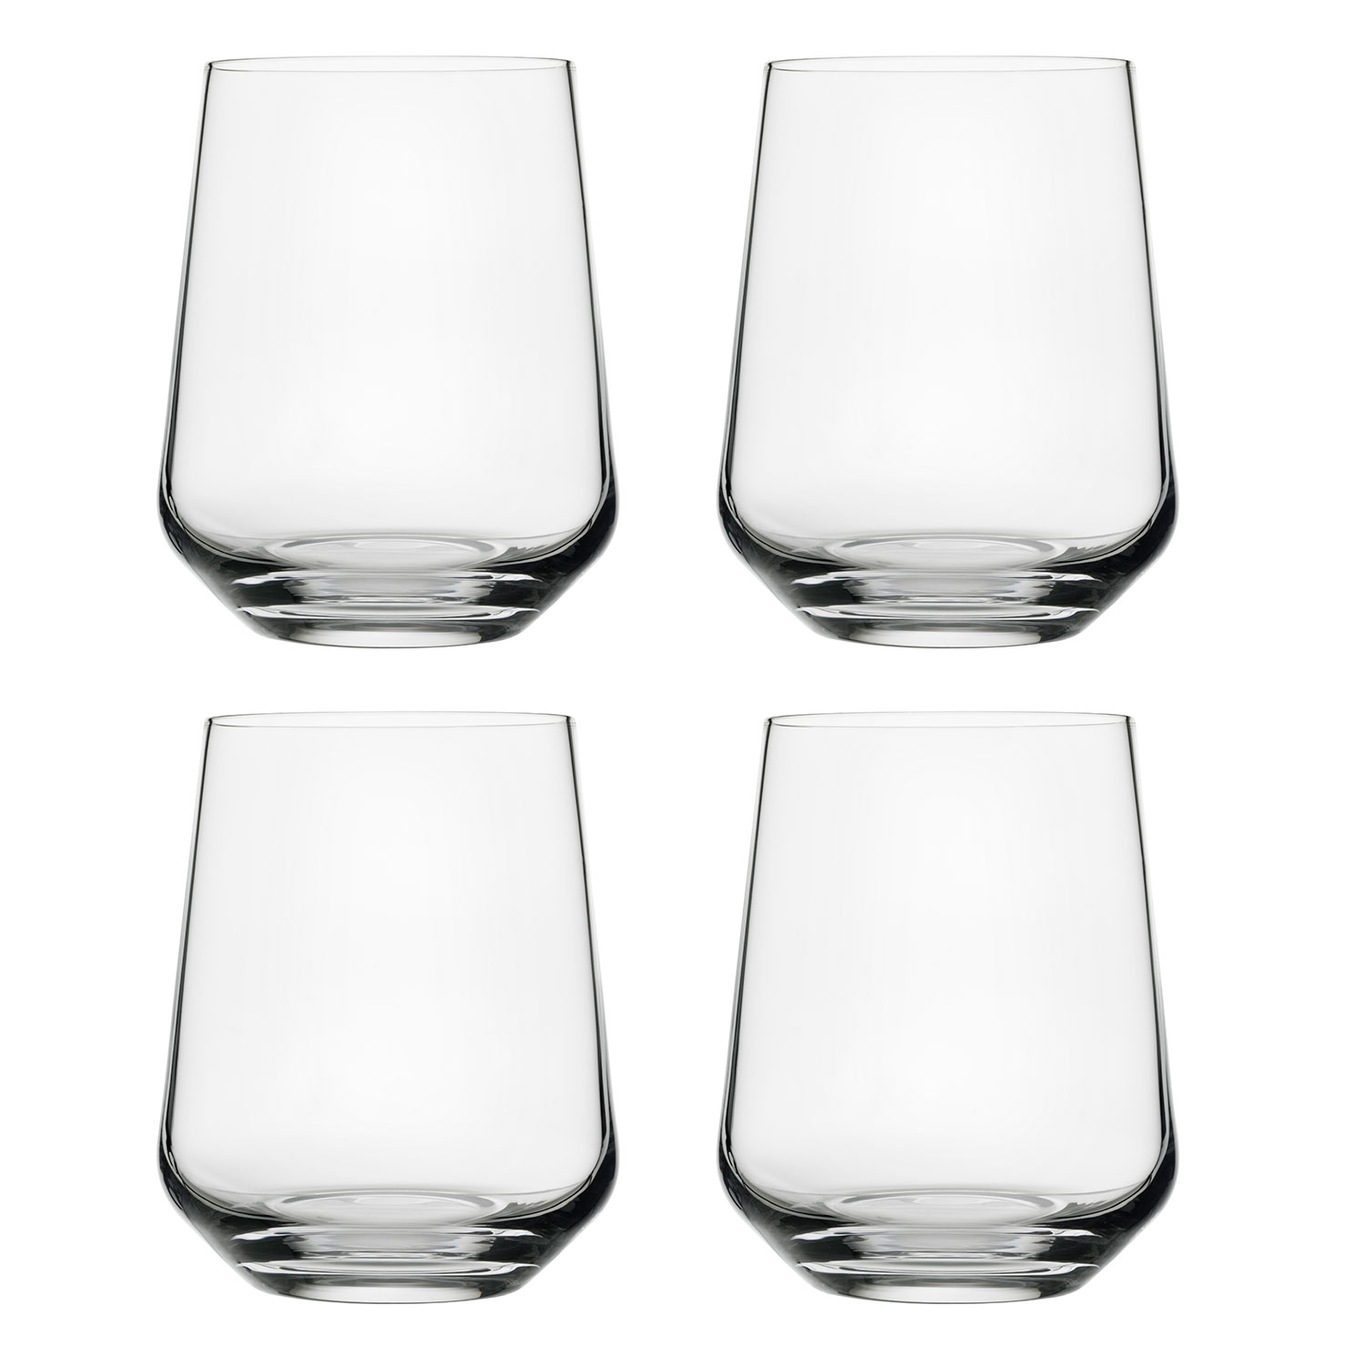 https://royaldesign.com/image/11/iittala-essence-water-glass-35-cl-set-of-4-clear-0?w=800&quality=80